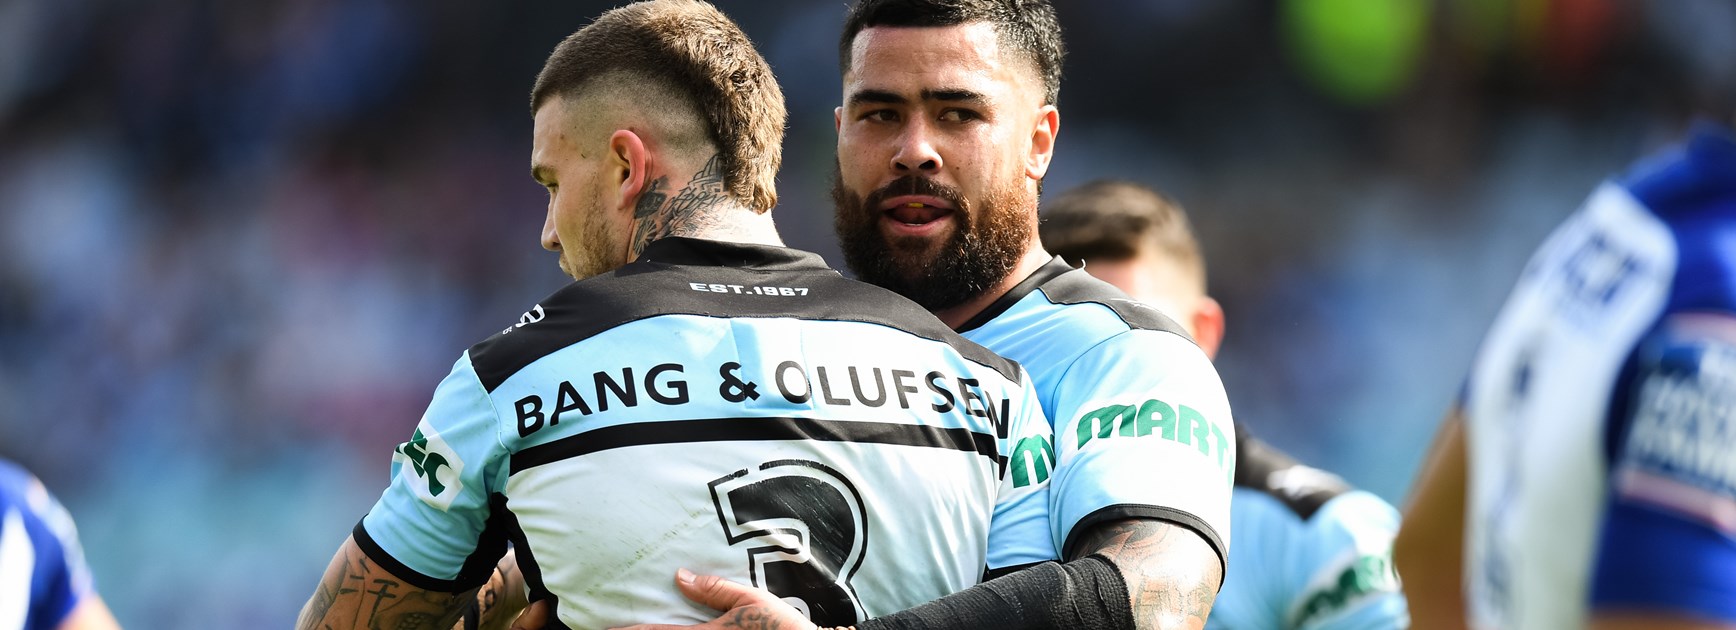 Andrew Fifita and Josh Dugan celebrate a try.